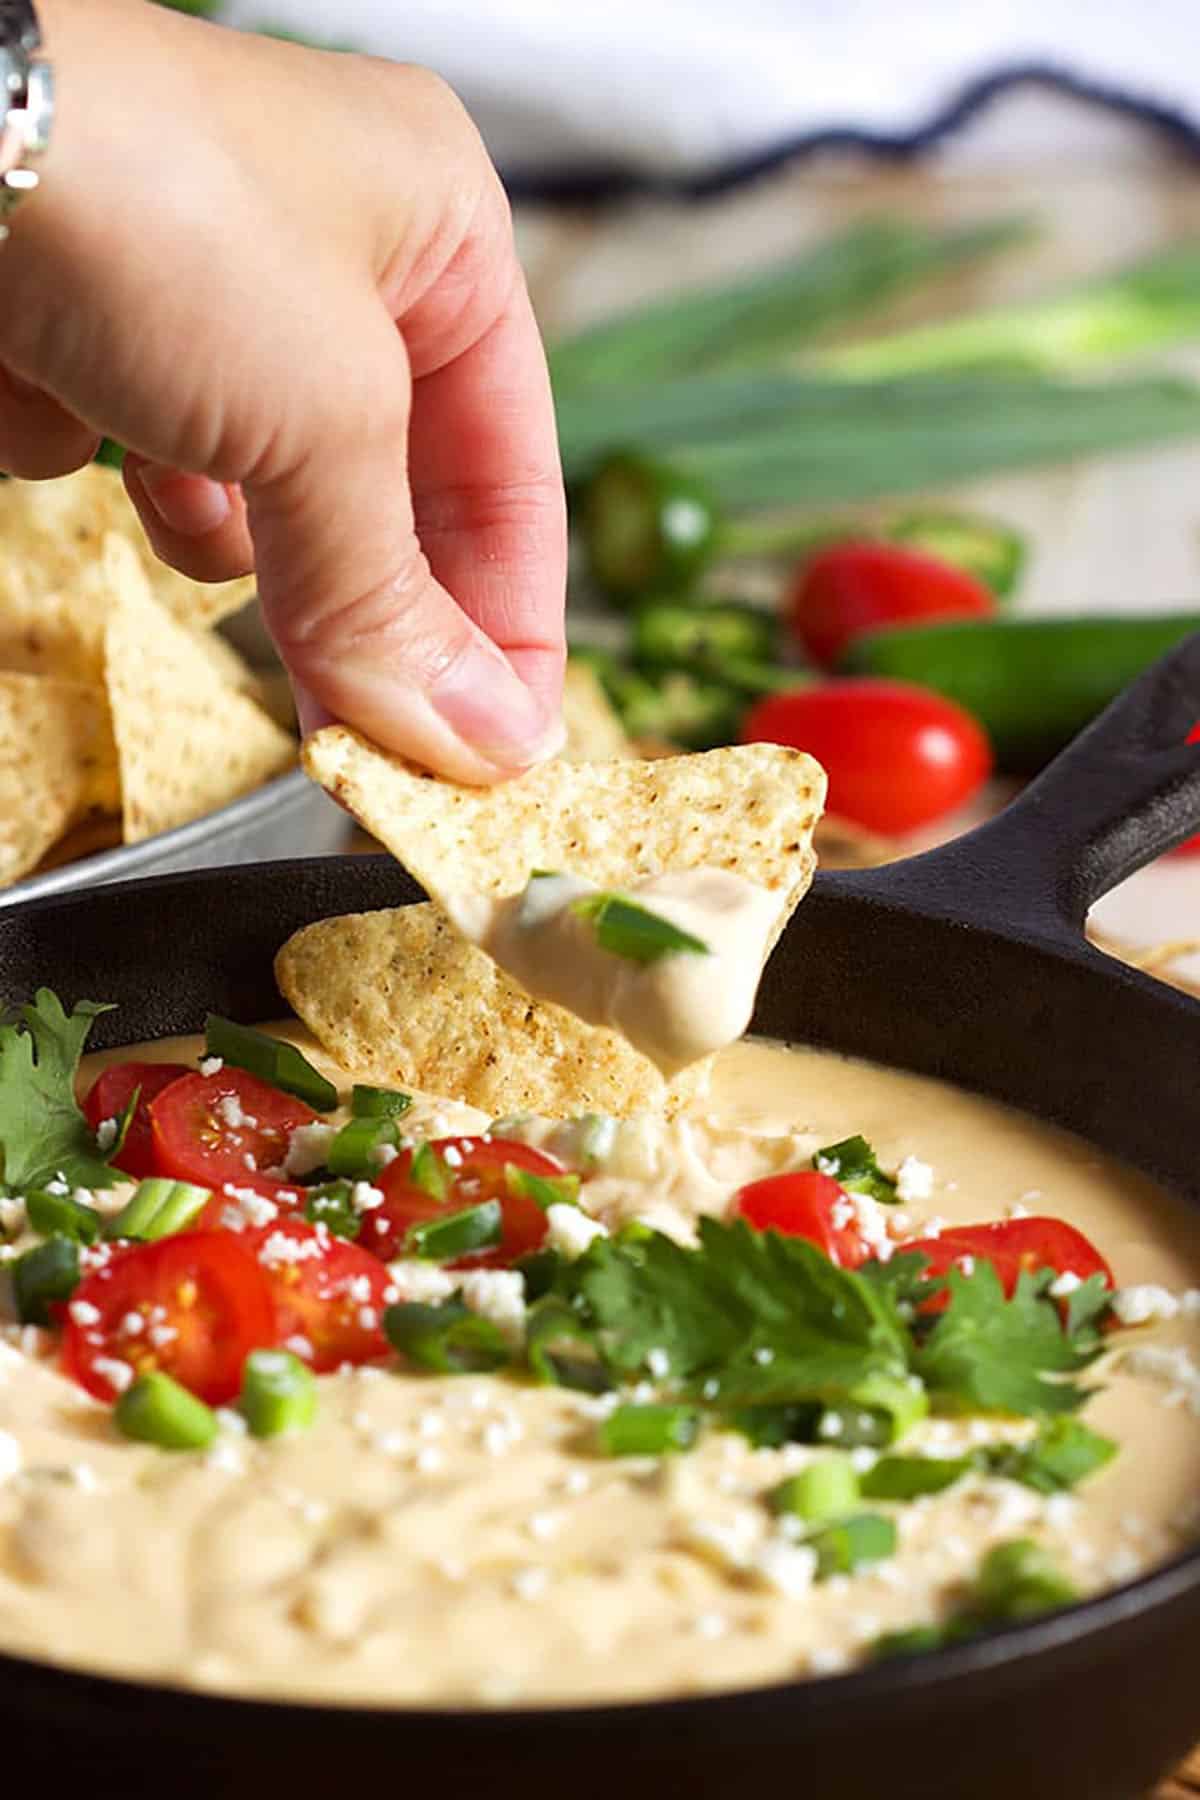 White Queso Dip, Queso Blanco, in a skillet with a hand dipping a chip into it